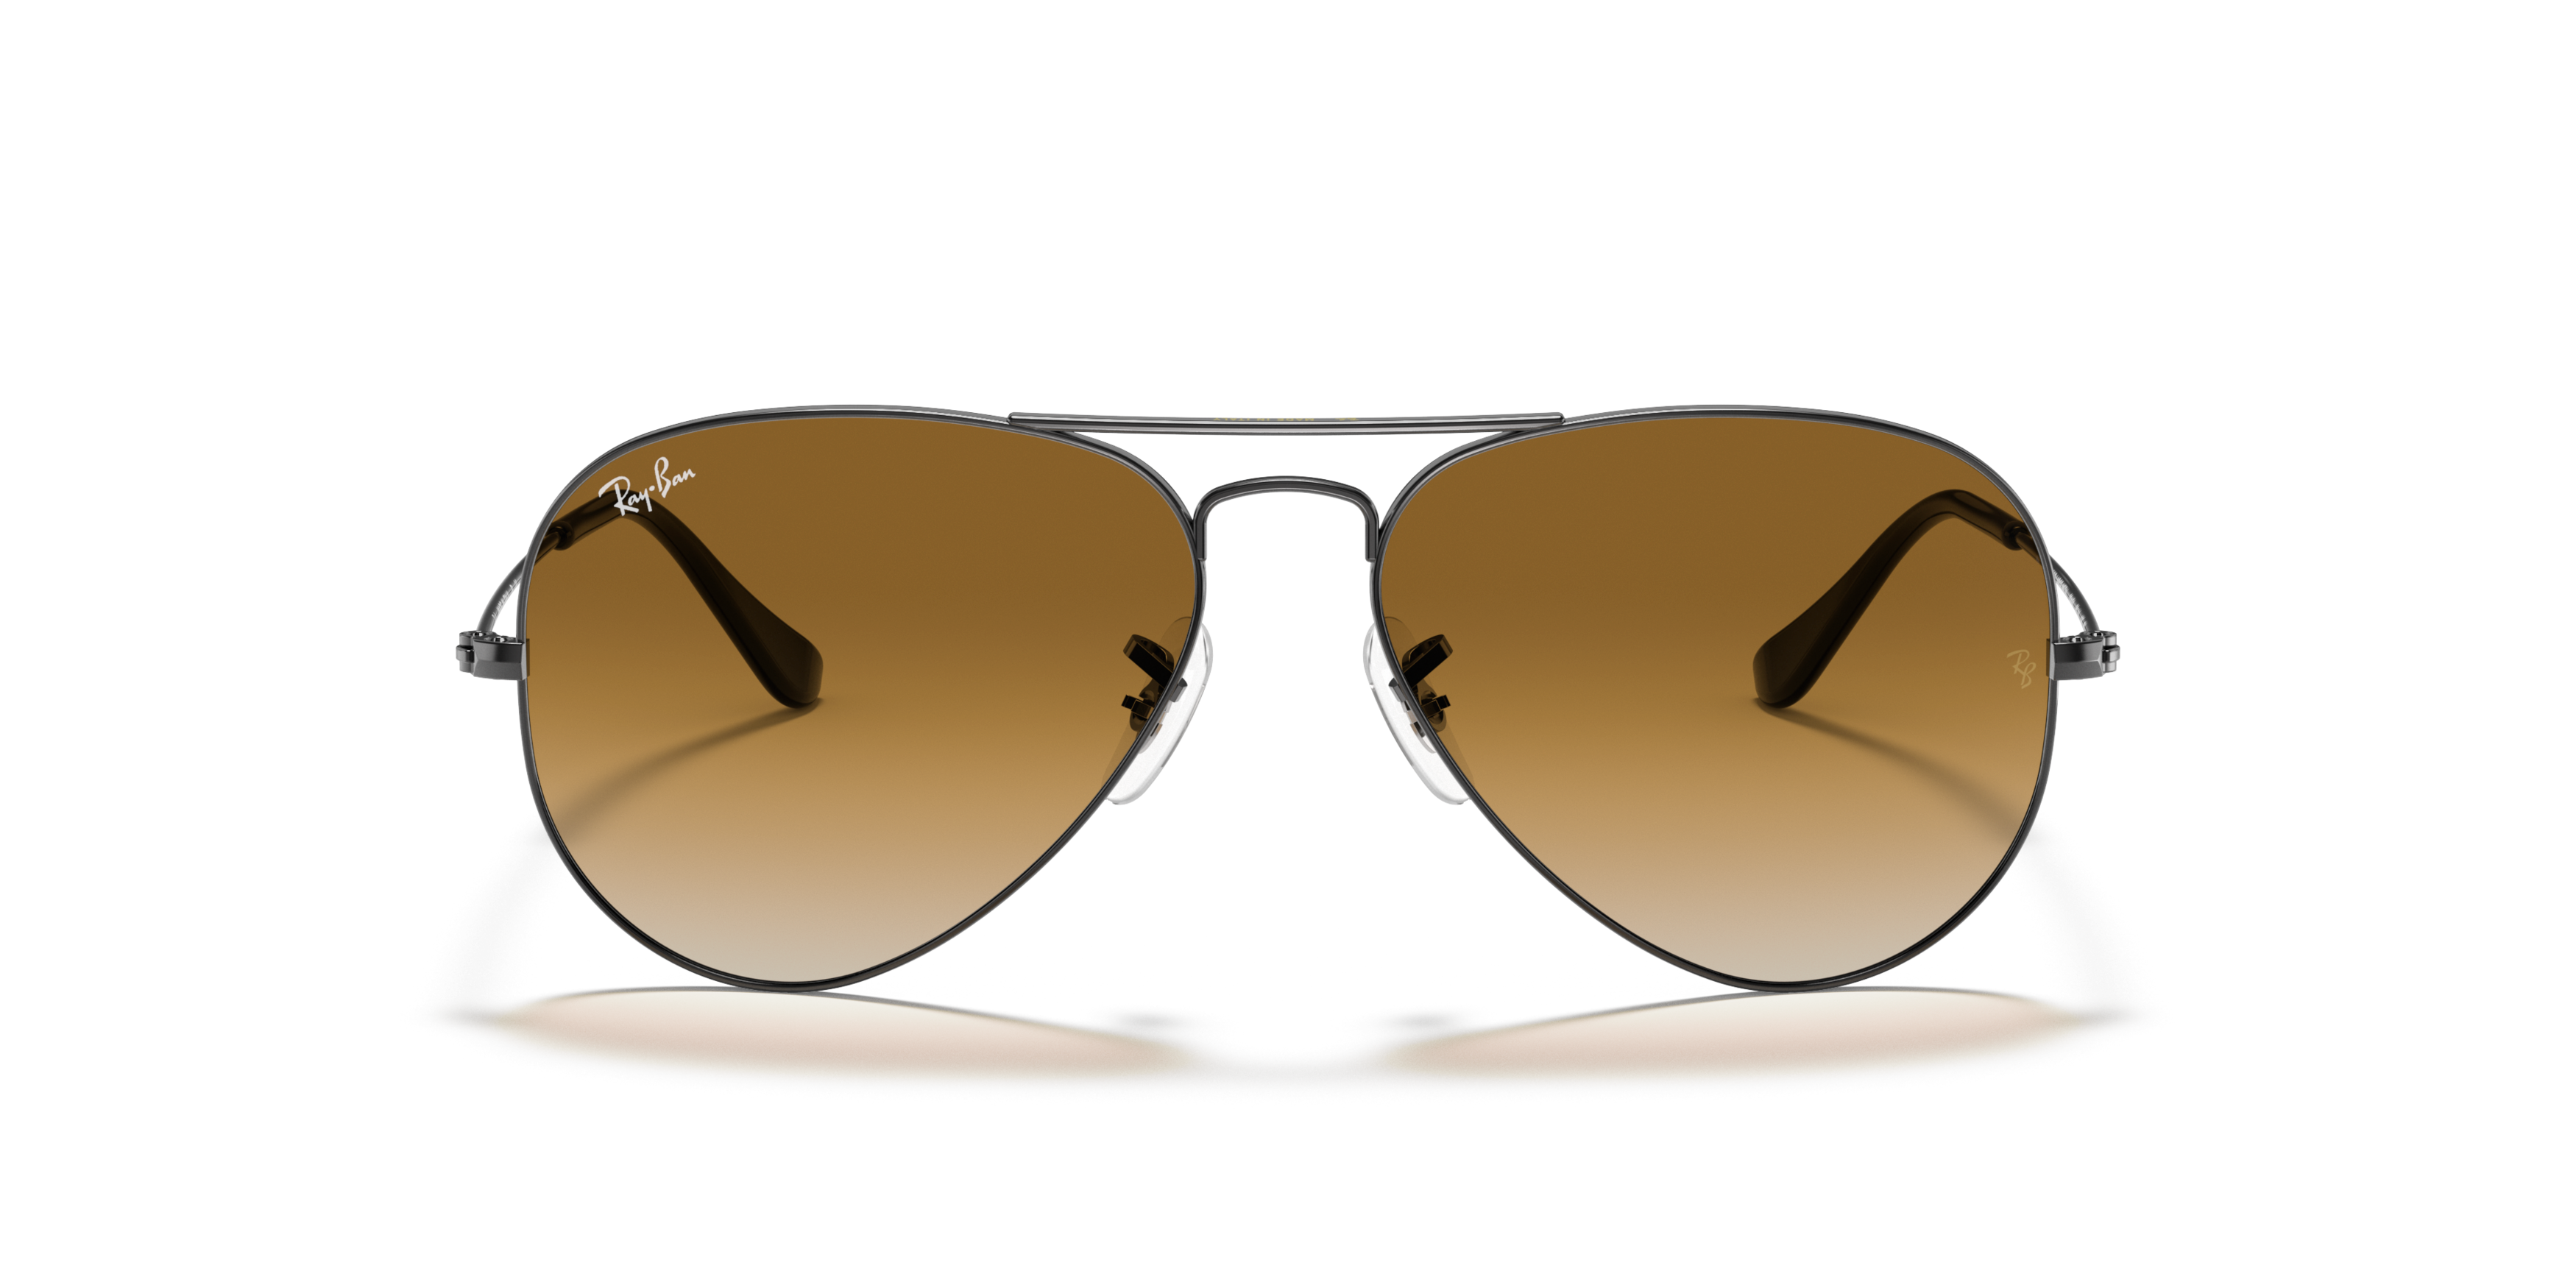 [products.image.front] Ray-Ban Aviator Gradient RB3025 004/51